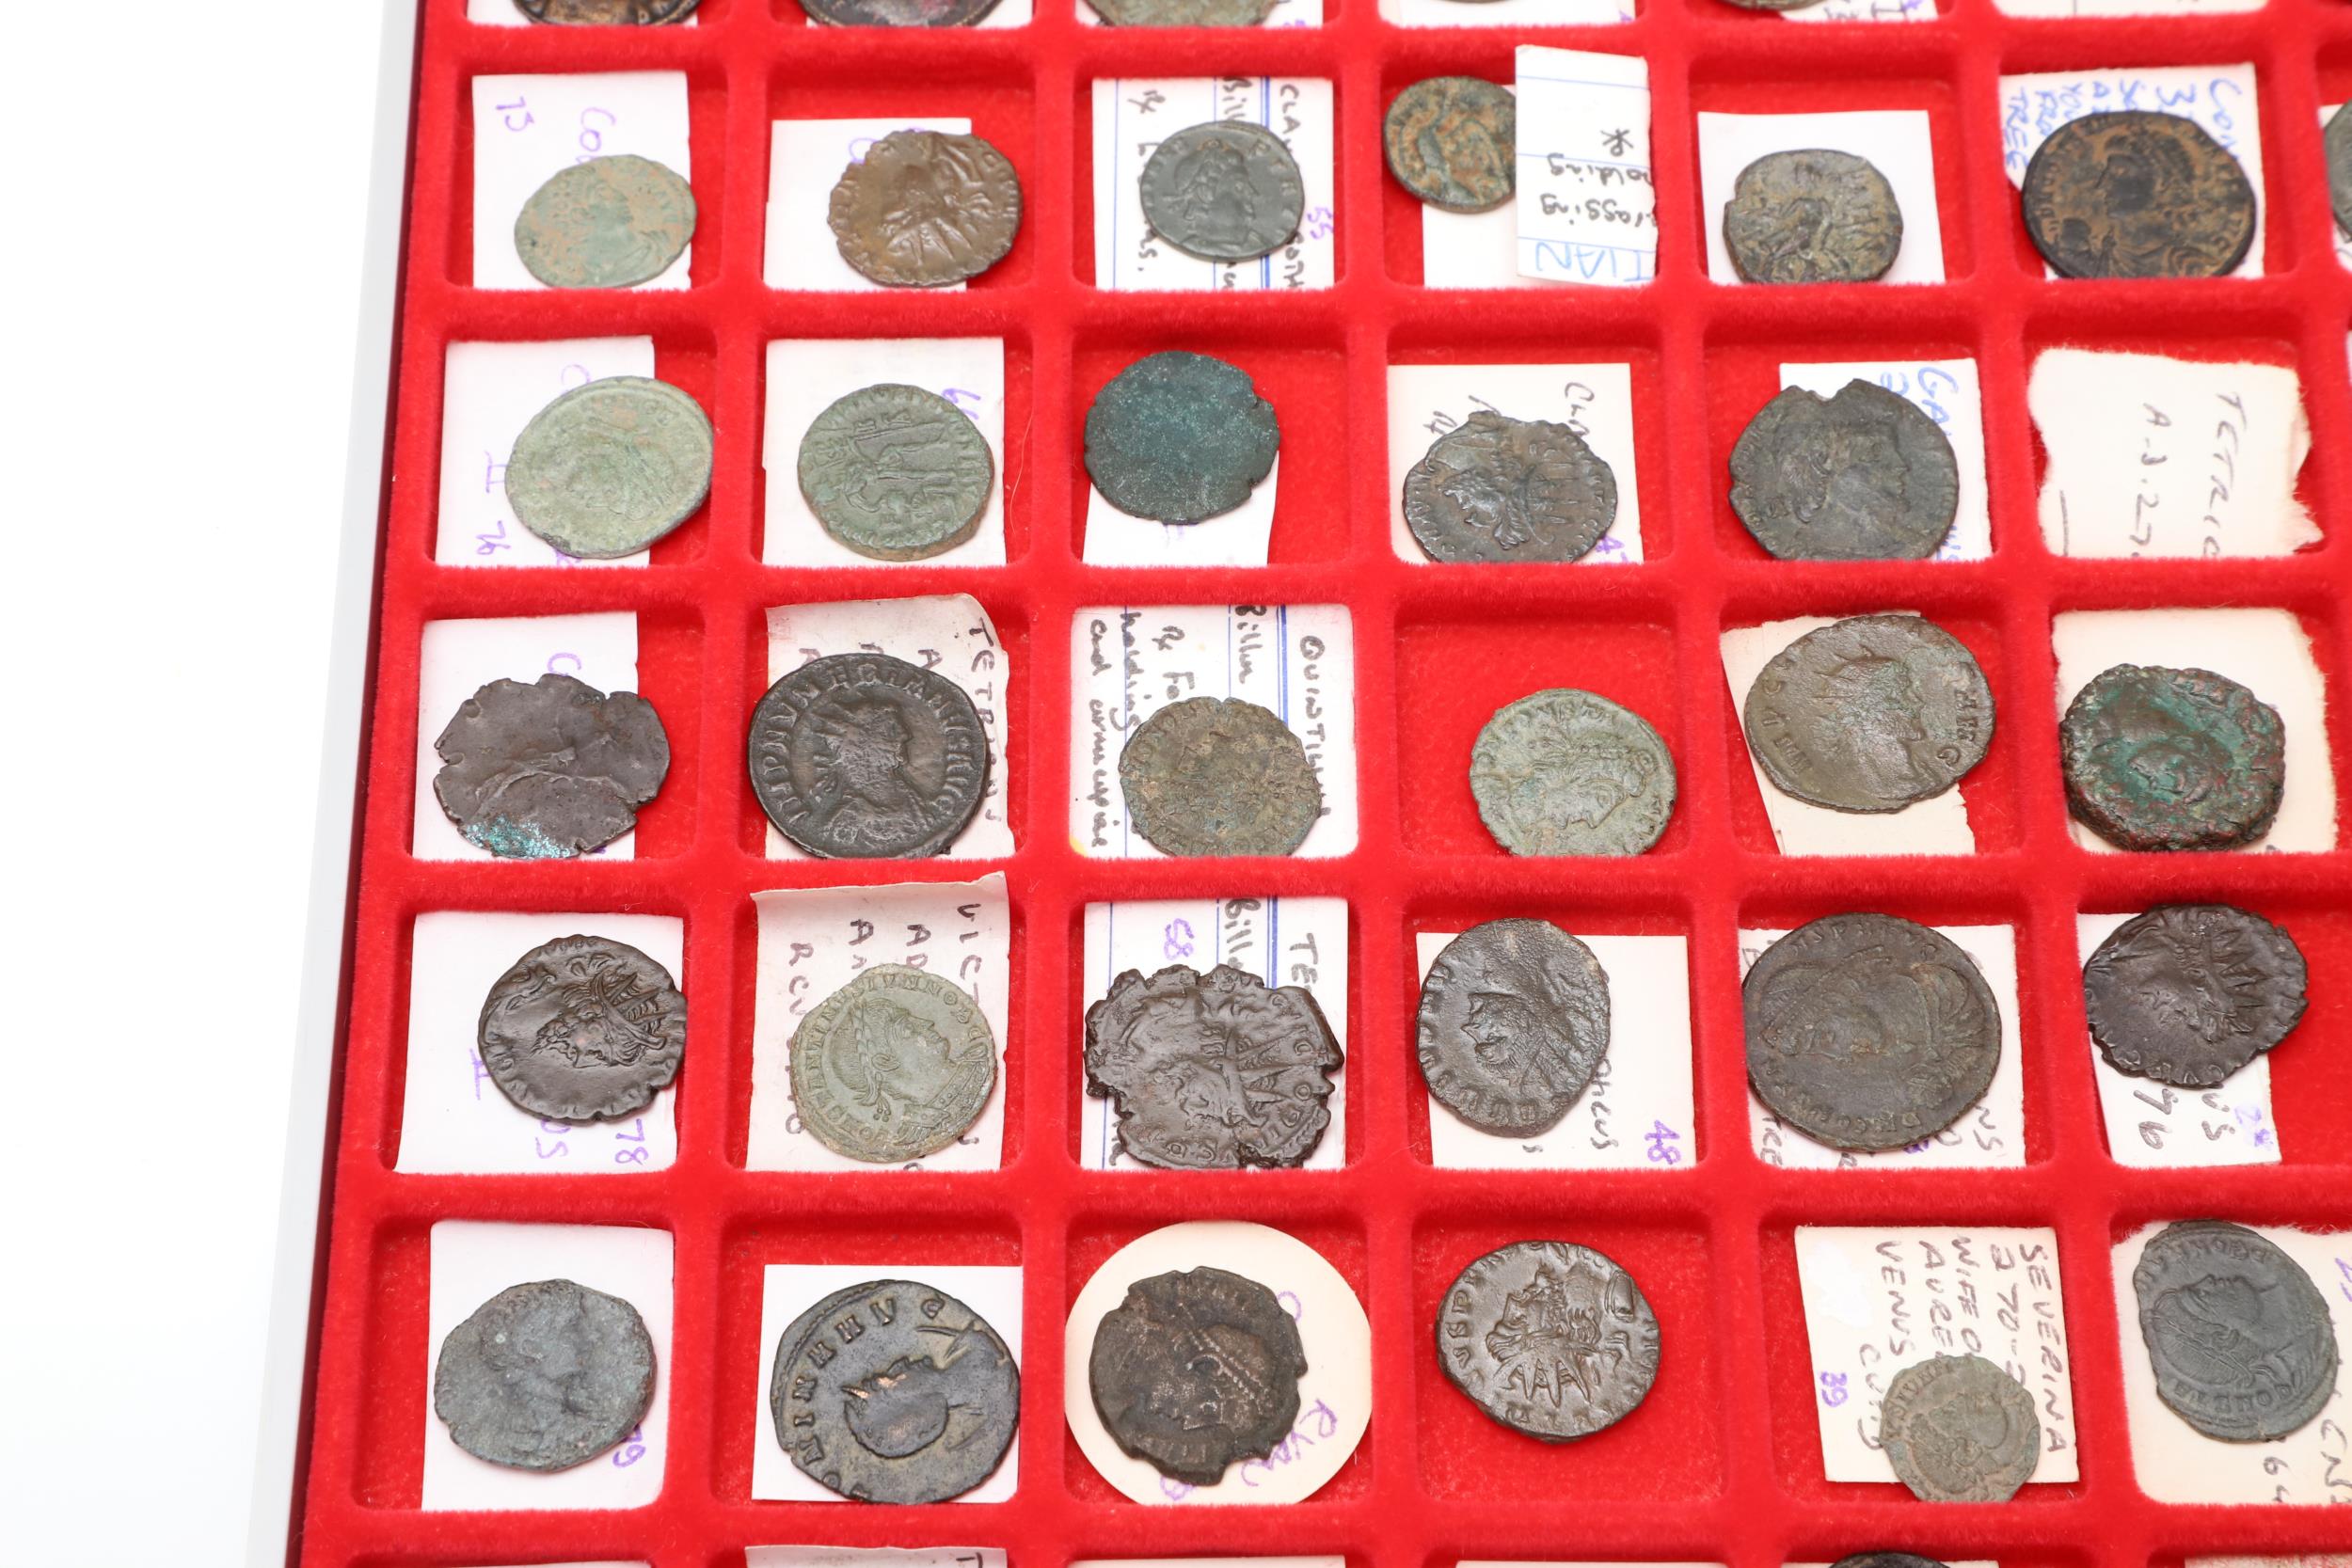 A COLLECTION OF ROMAN COINS IN A LINDNER COIN TRAY. - Image 8 of 11